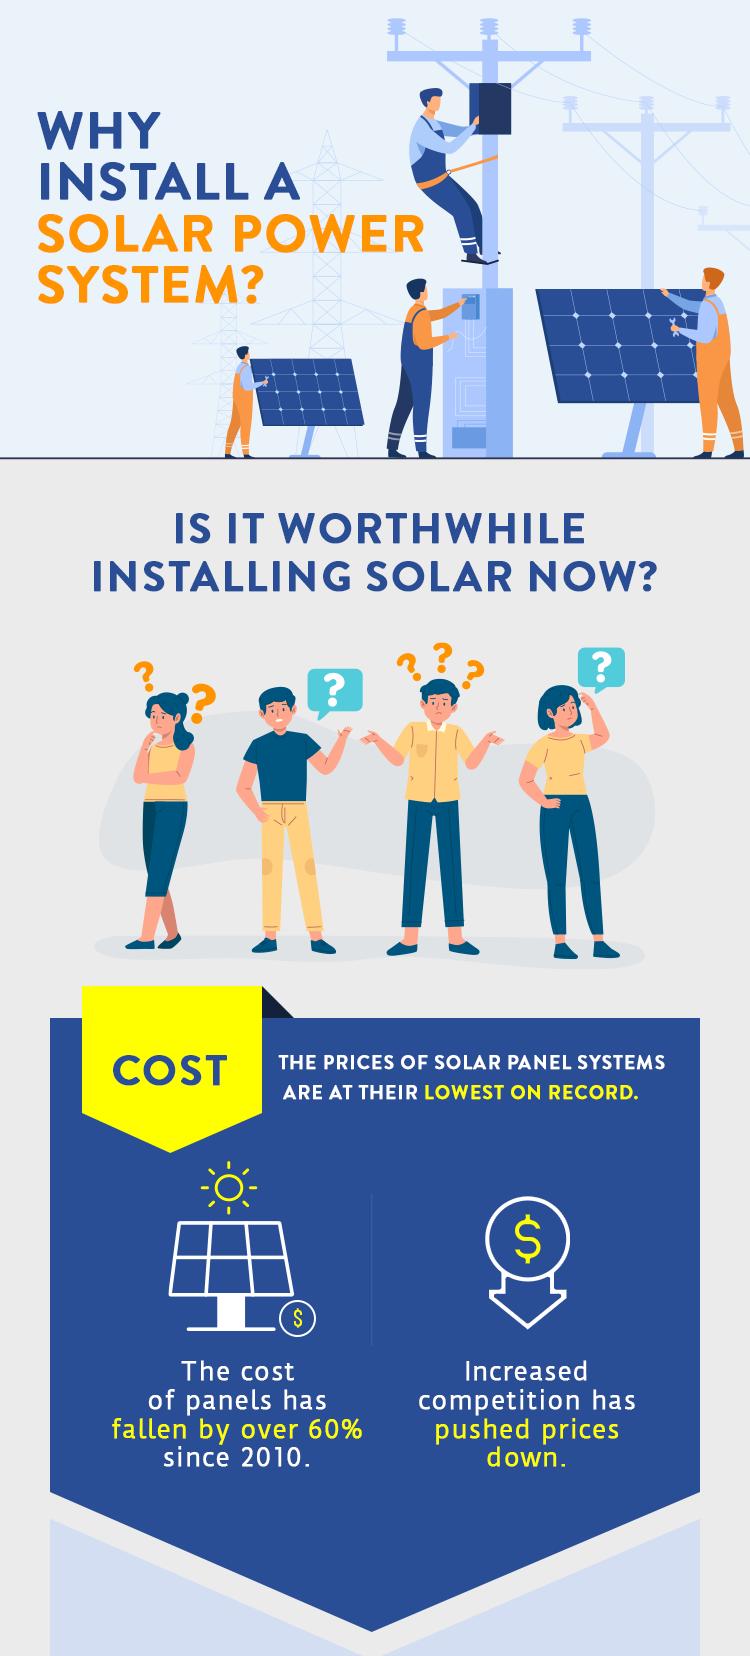 Why Install a Solar Power System